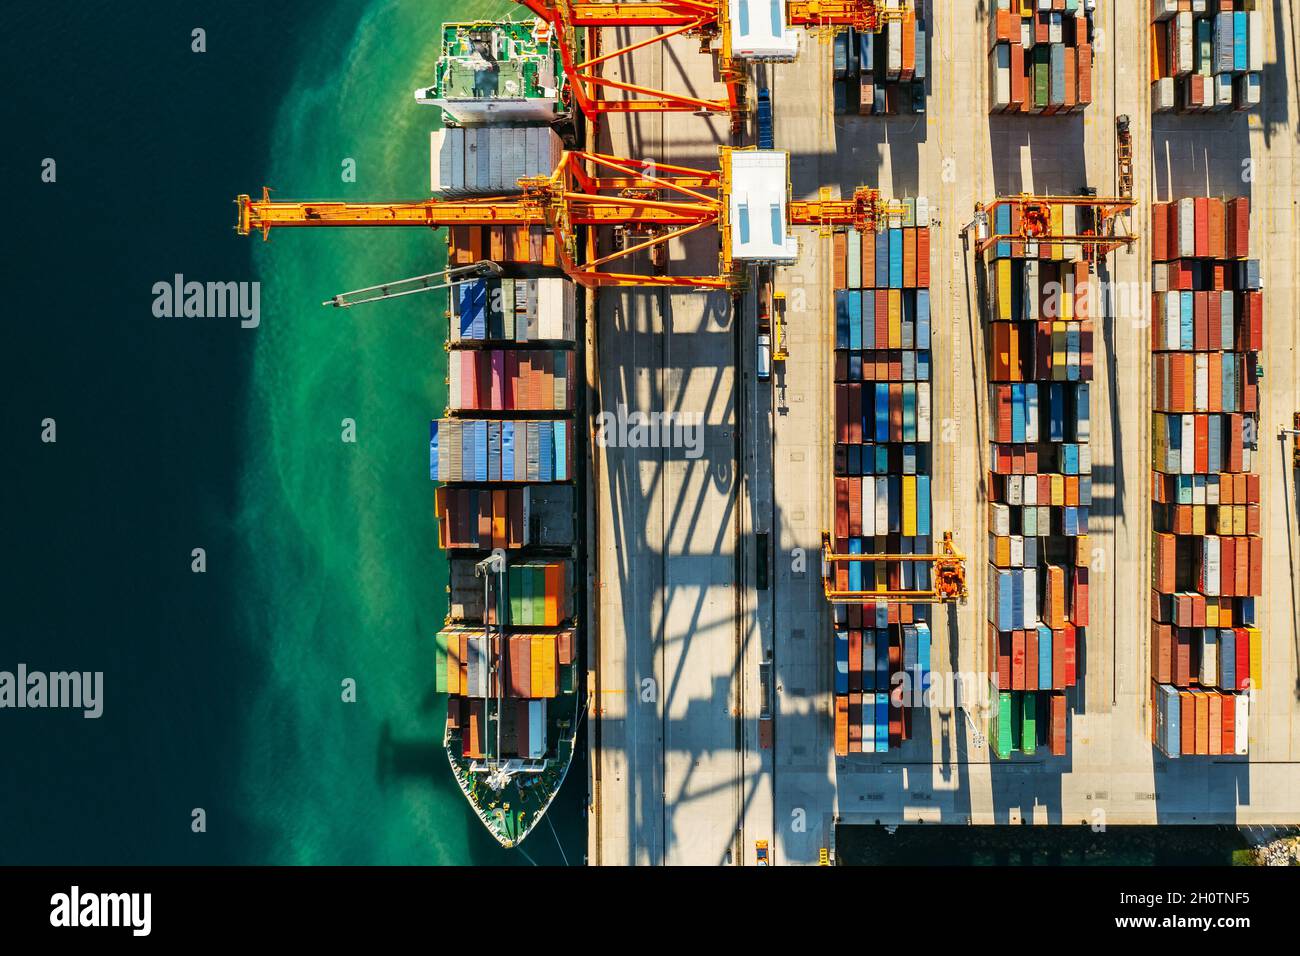 Containers in international shipping dock waiting to import or export and transportation. Top view of loading containers on the ship in the port Stock Photo